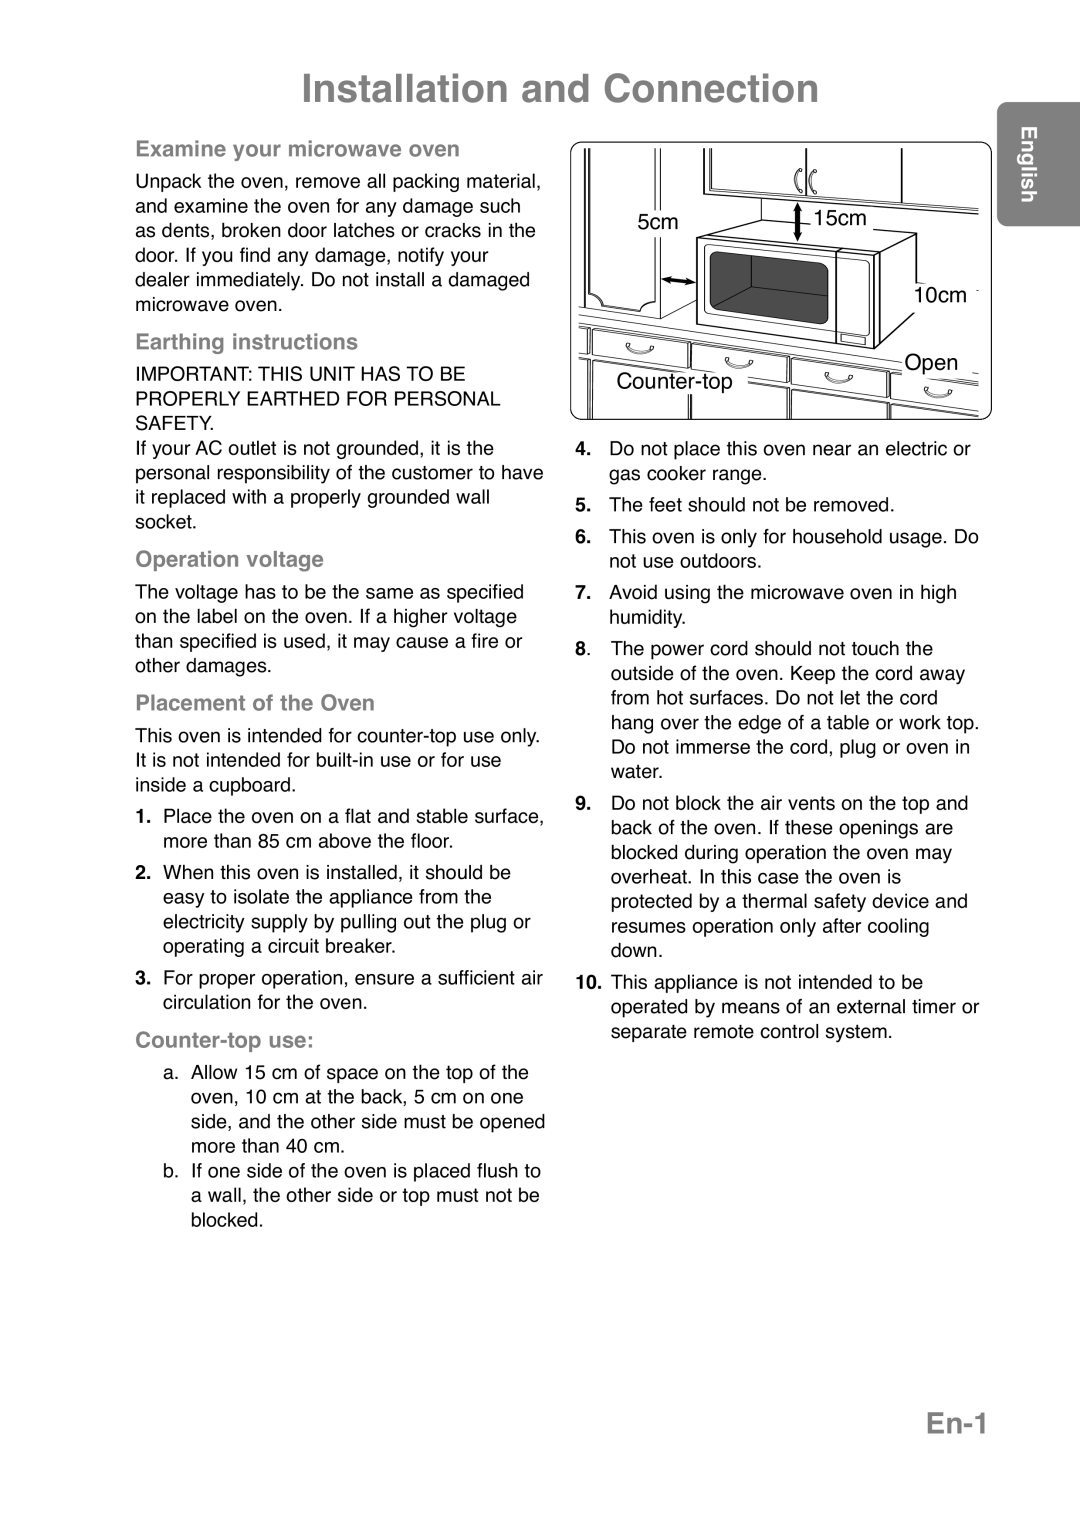 Panasonic NN-CT559W Installation and Connection, En-1, Examine your microwave oven, Earthing instructions, Counter-top use 